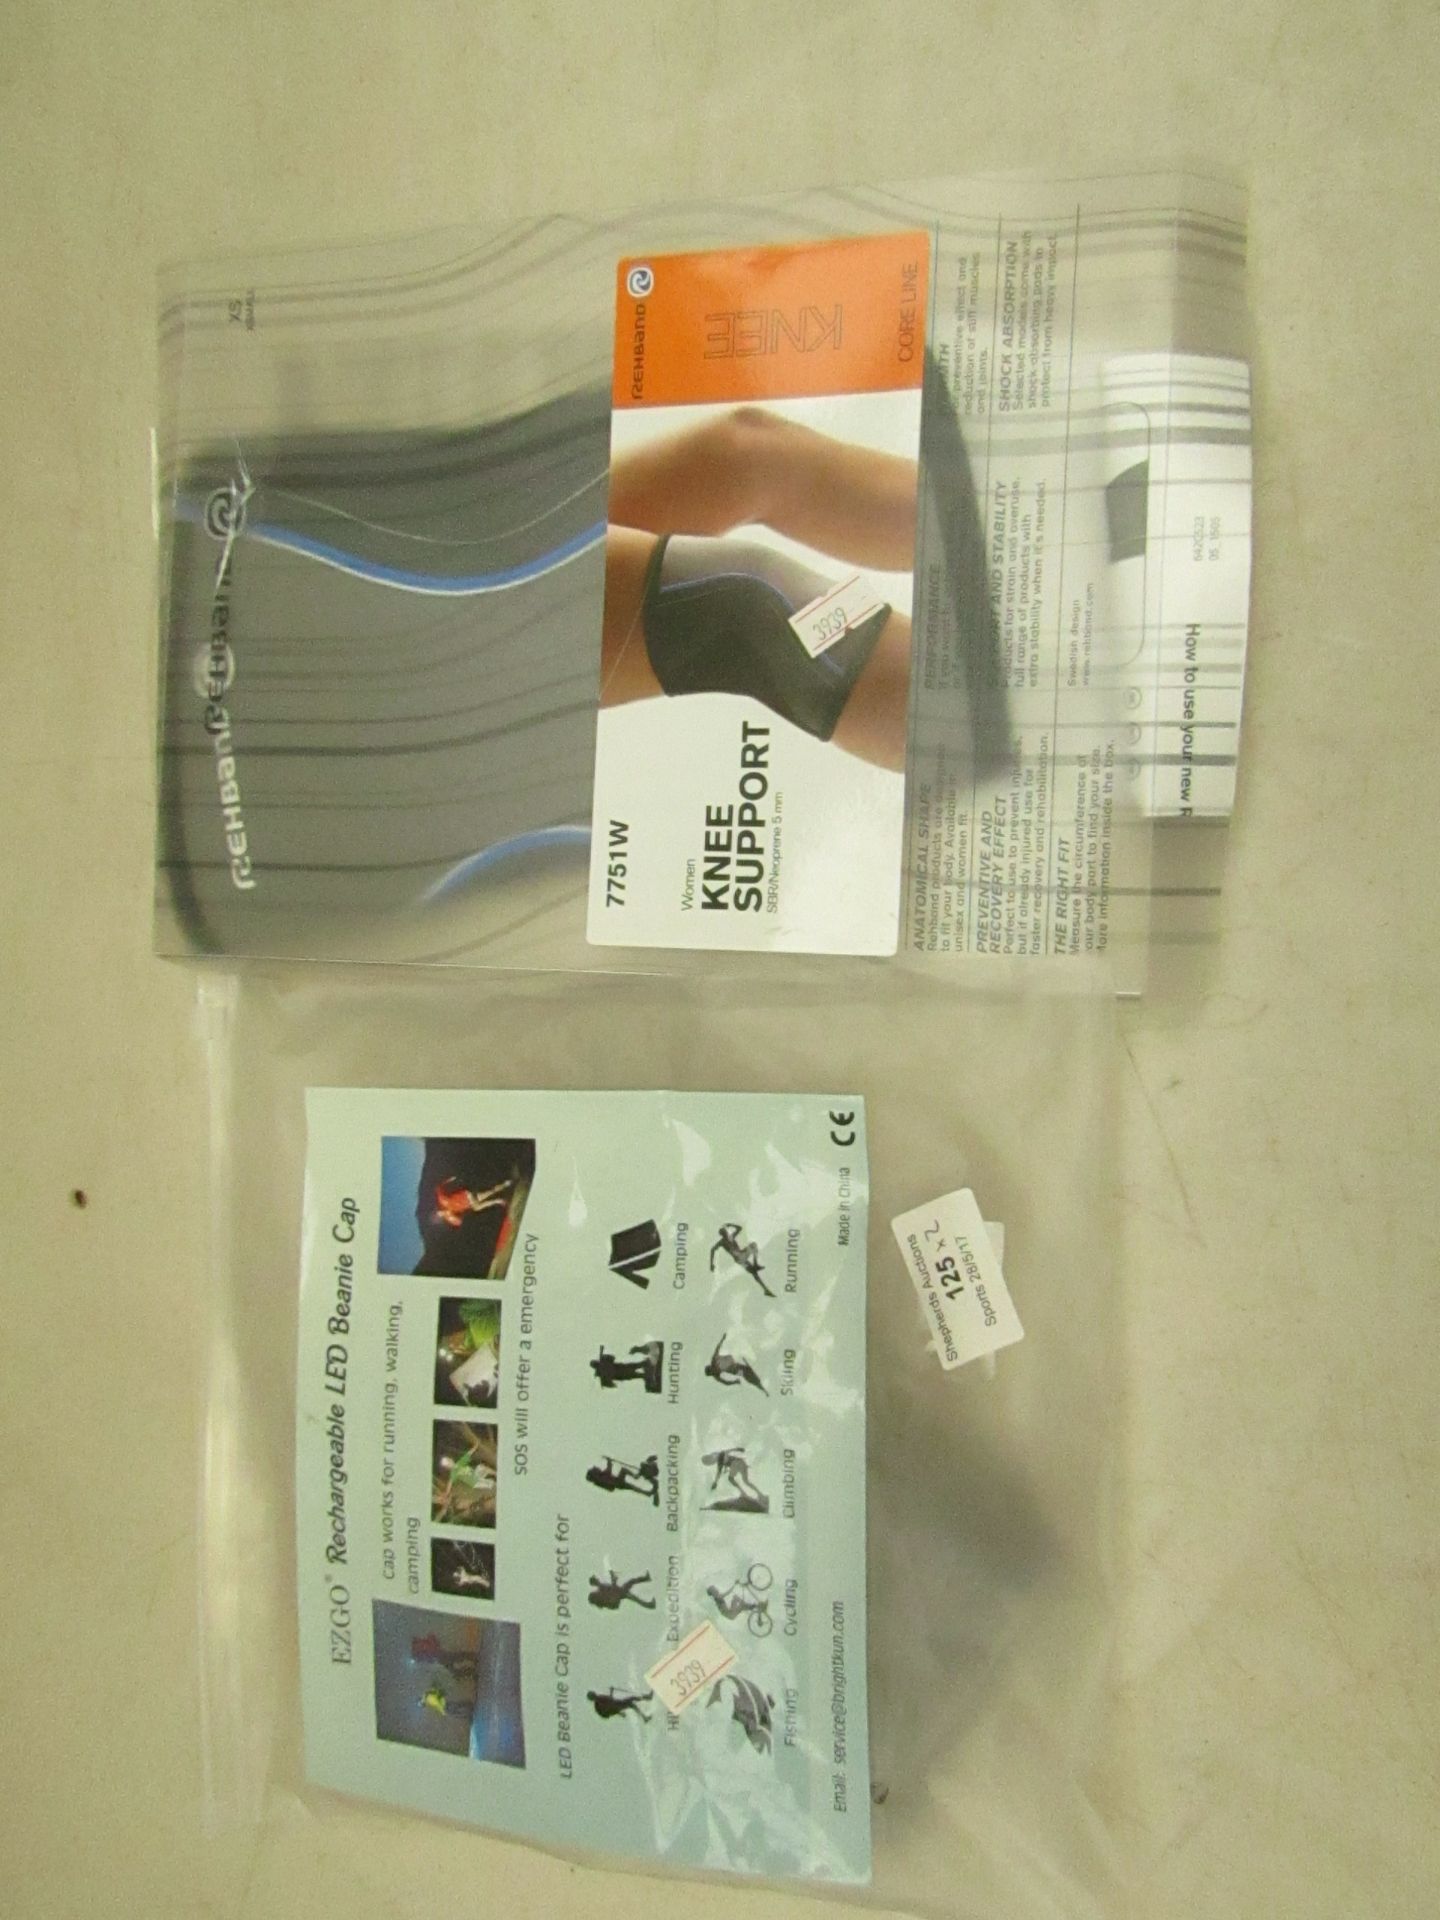 This lot contains  - Knee support.  - Rechargable LED beanie cap.